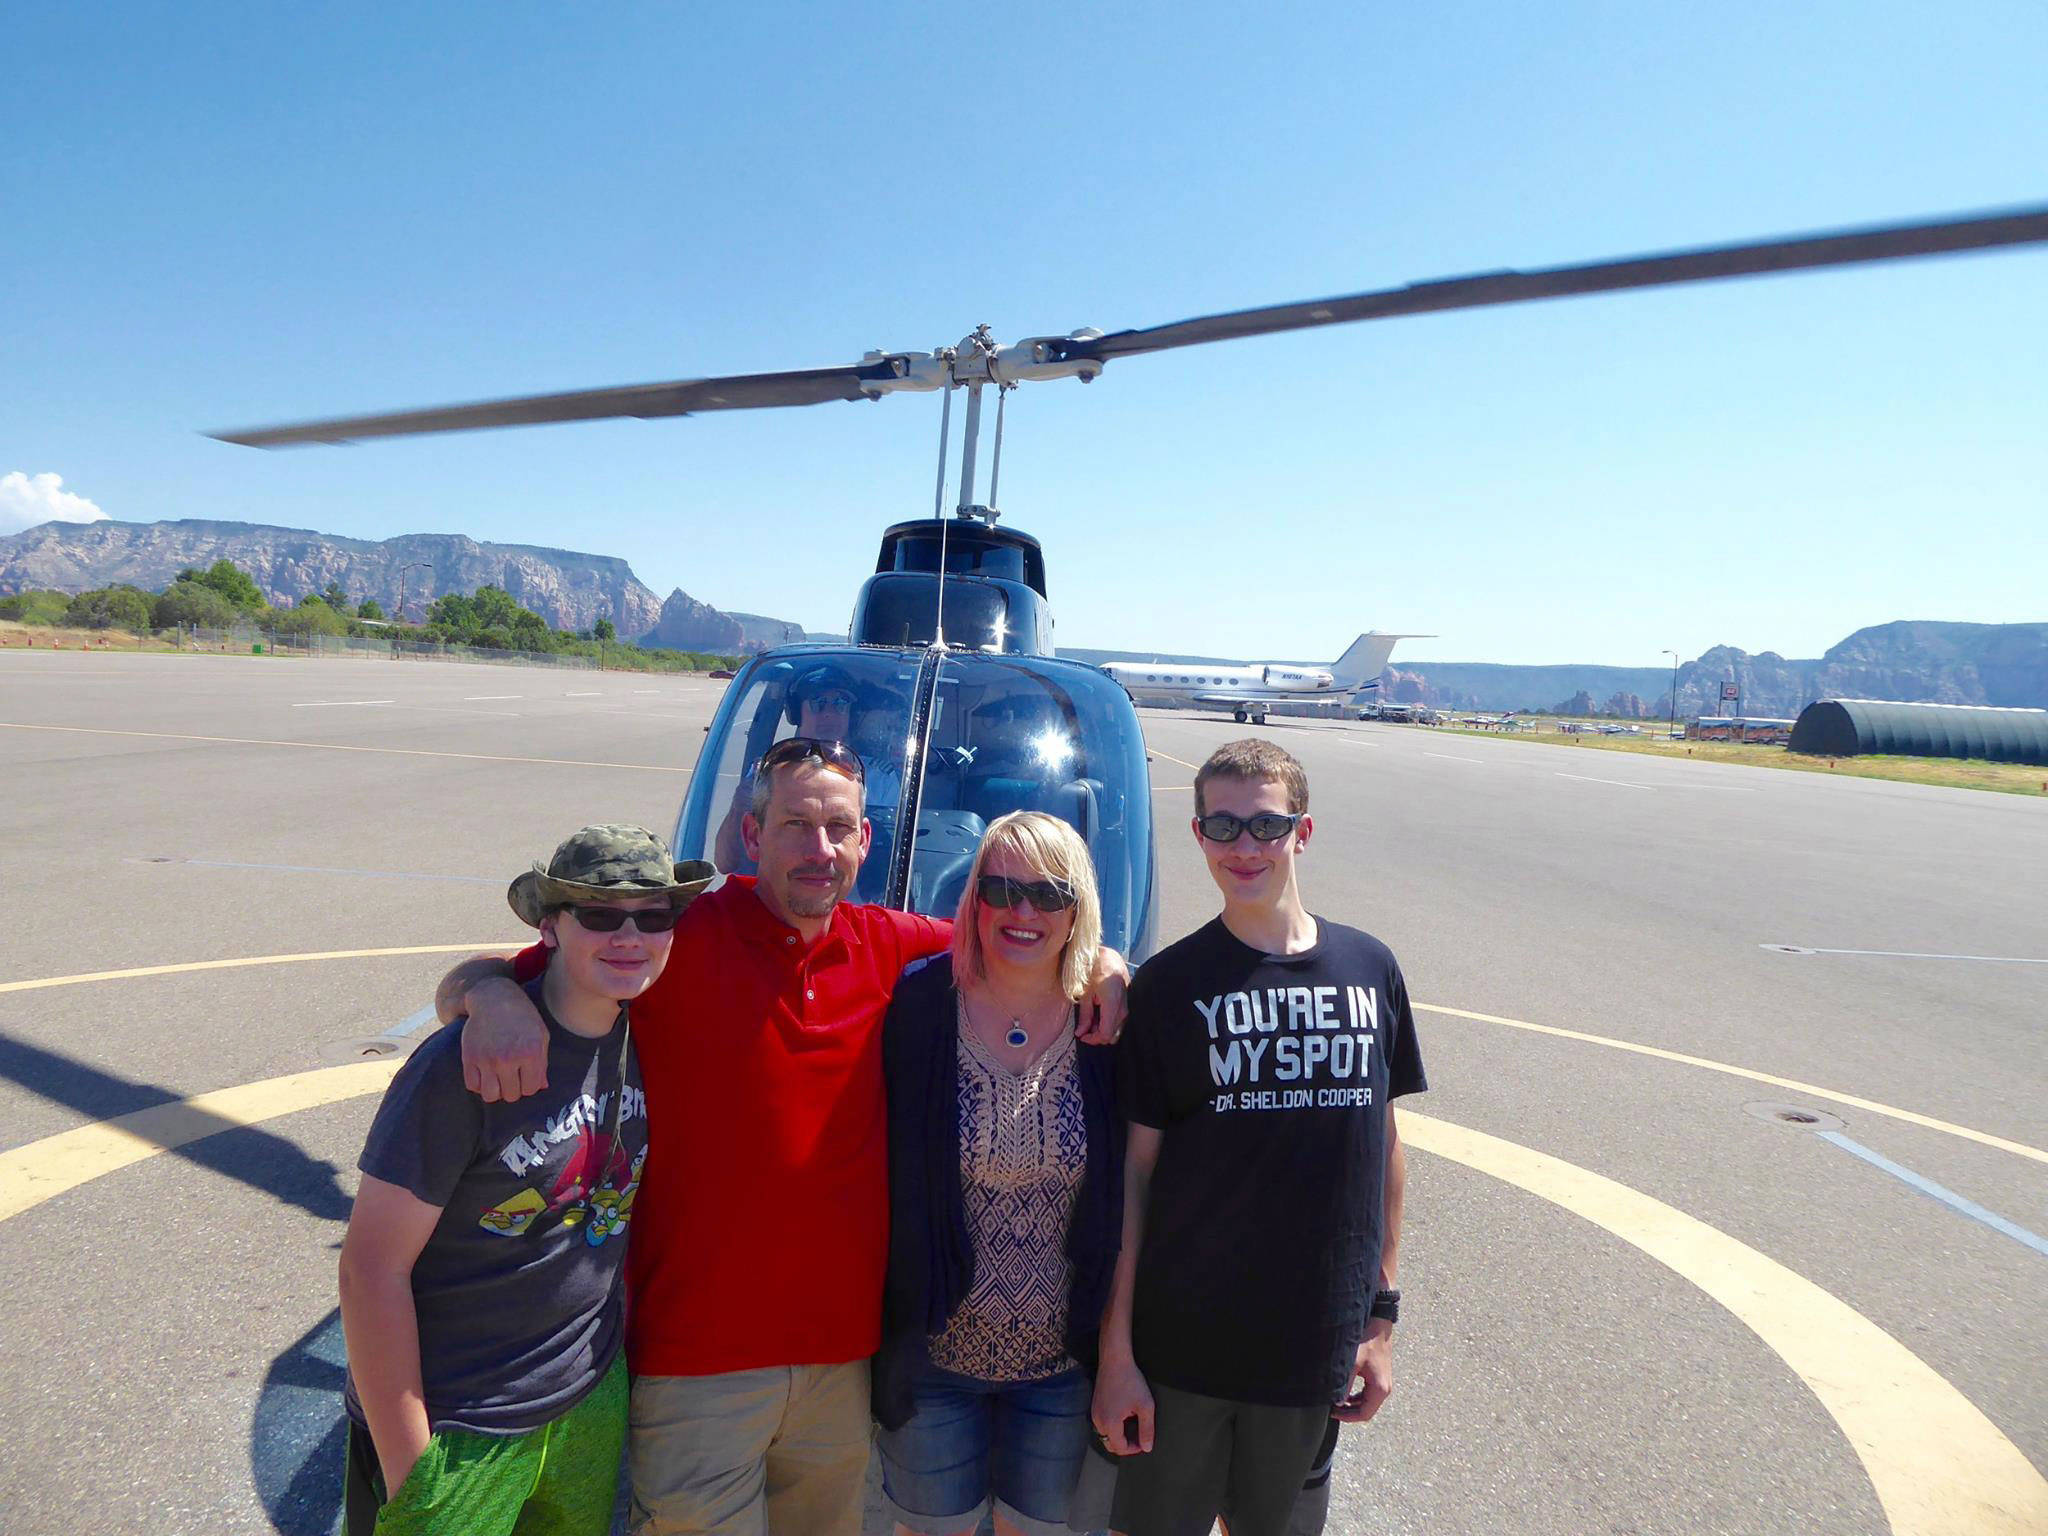 Josslyn Streett                                The Streett family of Sequim, from left, Sawyer, Robert, Josslyn and Robby, pose for a photo before their first flight over Sedona, Ariz., in July. The family was involved in a car wreck July 20 that took the lives of Robert and Robby. Josslyn said this was going to be the family’s Christmas card.